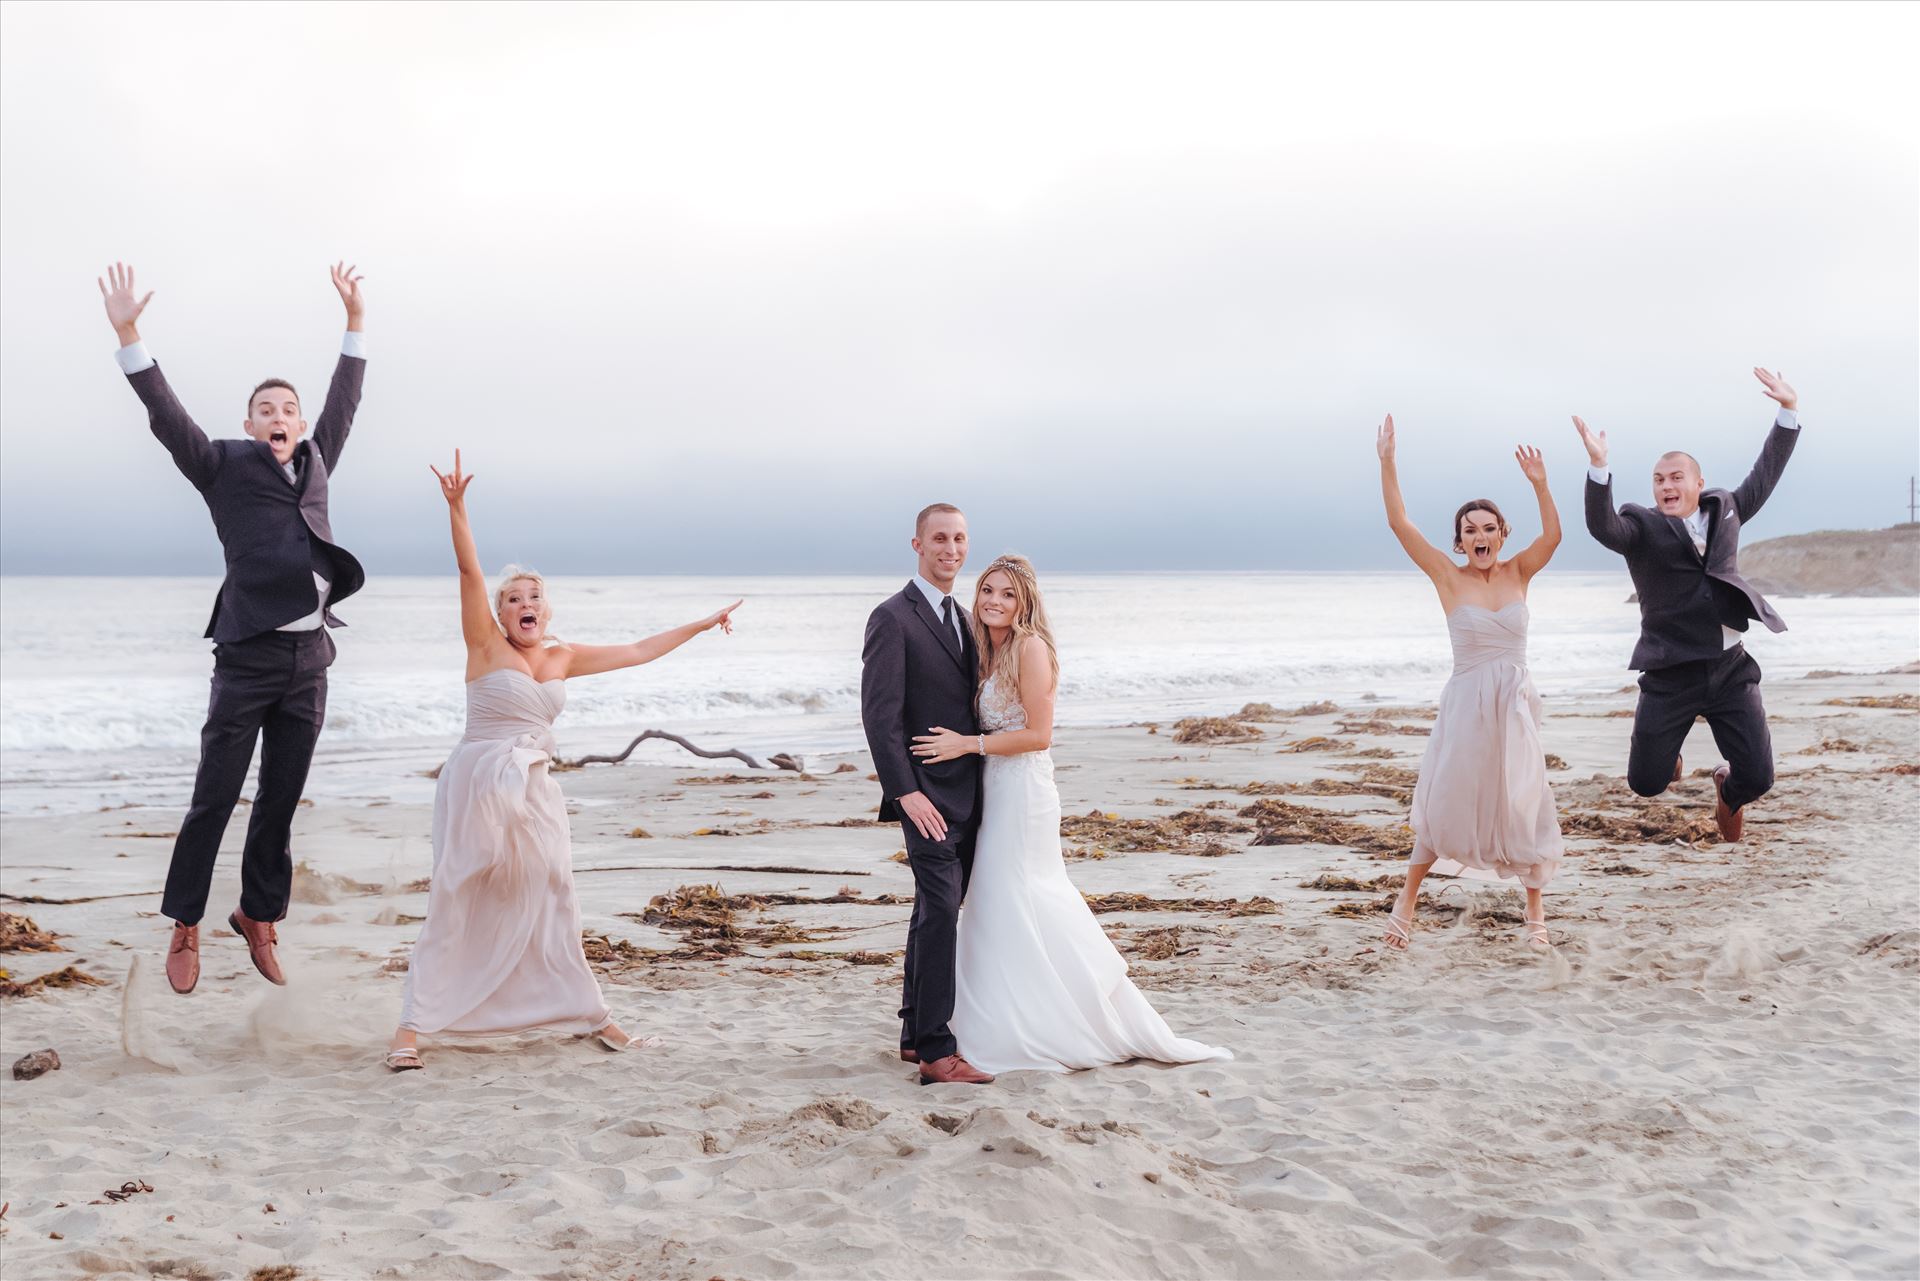 Courtney and Doug 69 Mirror's Edge Photography, San Luis Obispo Wedding Photographer captures Cayucos Wedding on the beach and bluffs in Cayucos Central California Coast. Wedding Party Bridal Party fun at the Beach by Sarah Williams